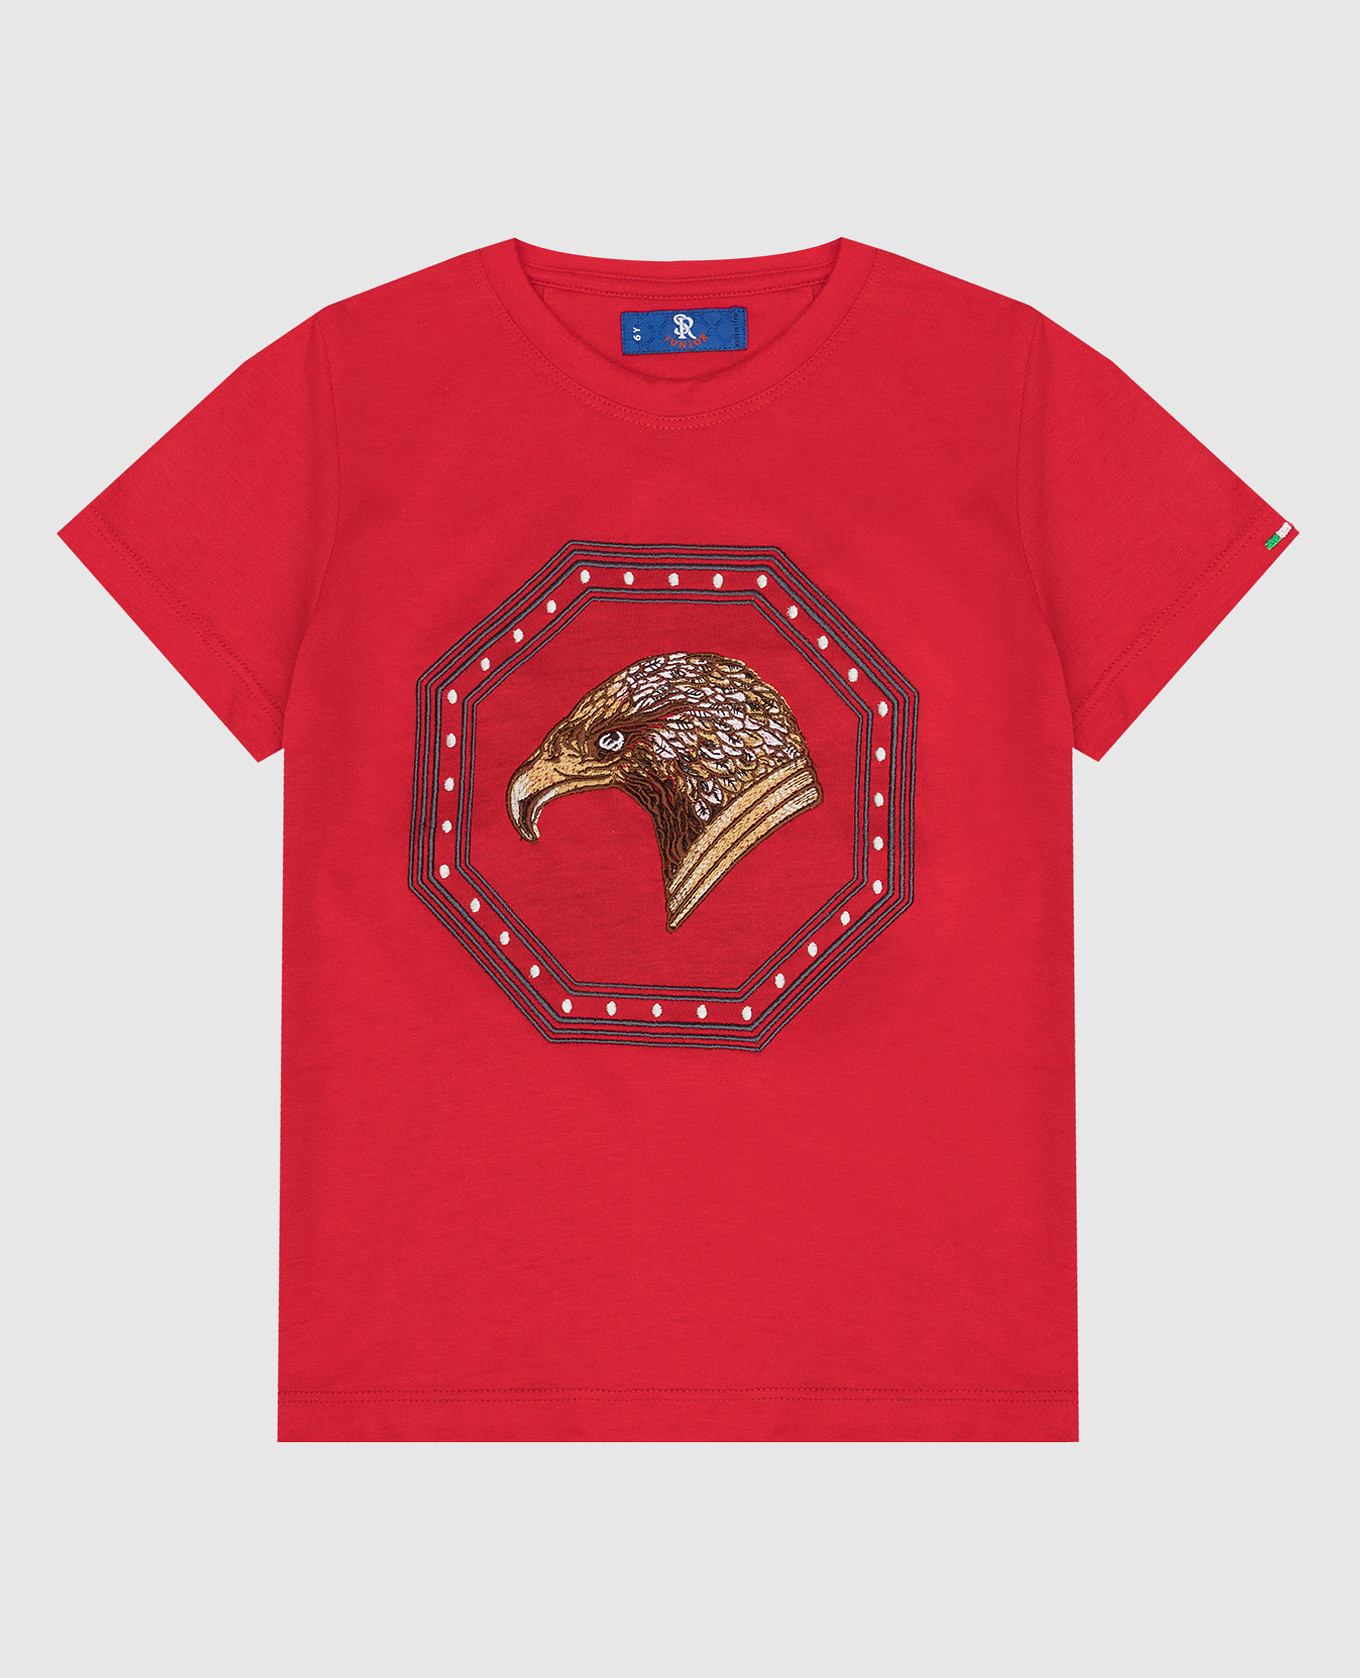 Children's red t-shirt with emblem embroidery